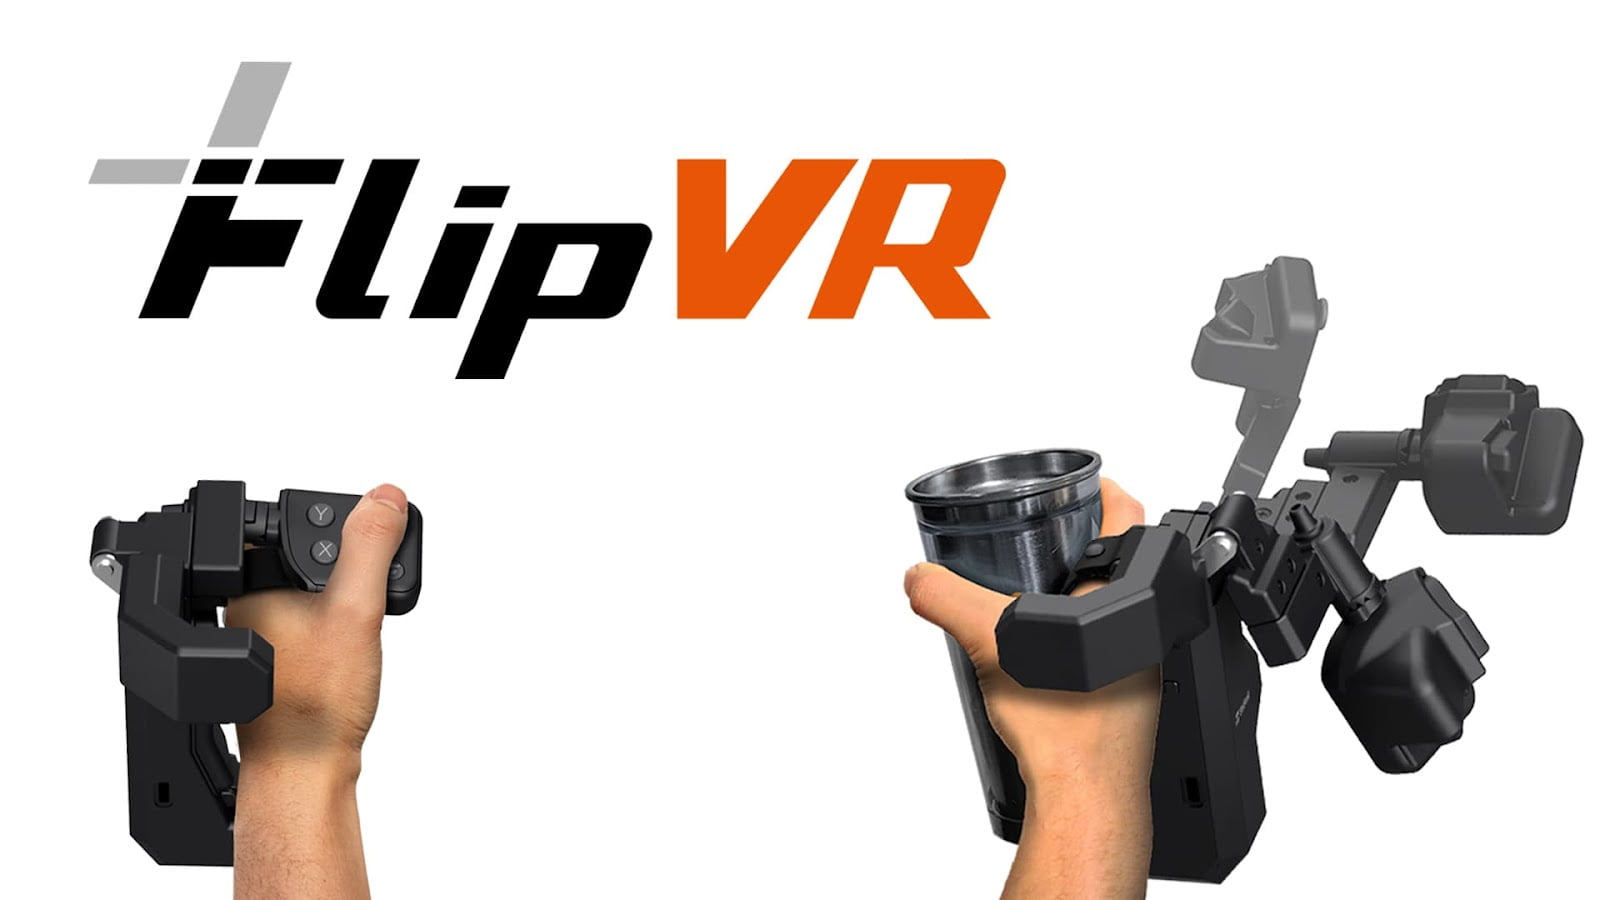 FlipVR VR controller lets you interact with VR and the real world